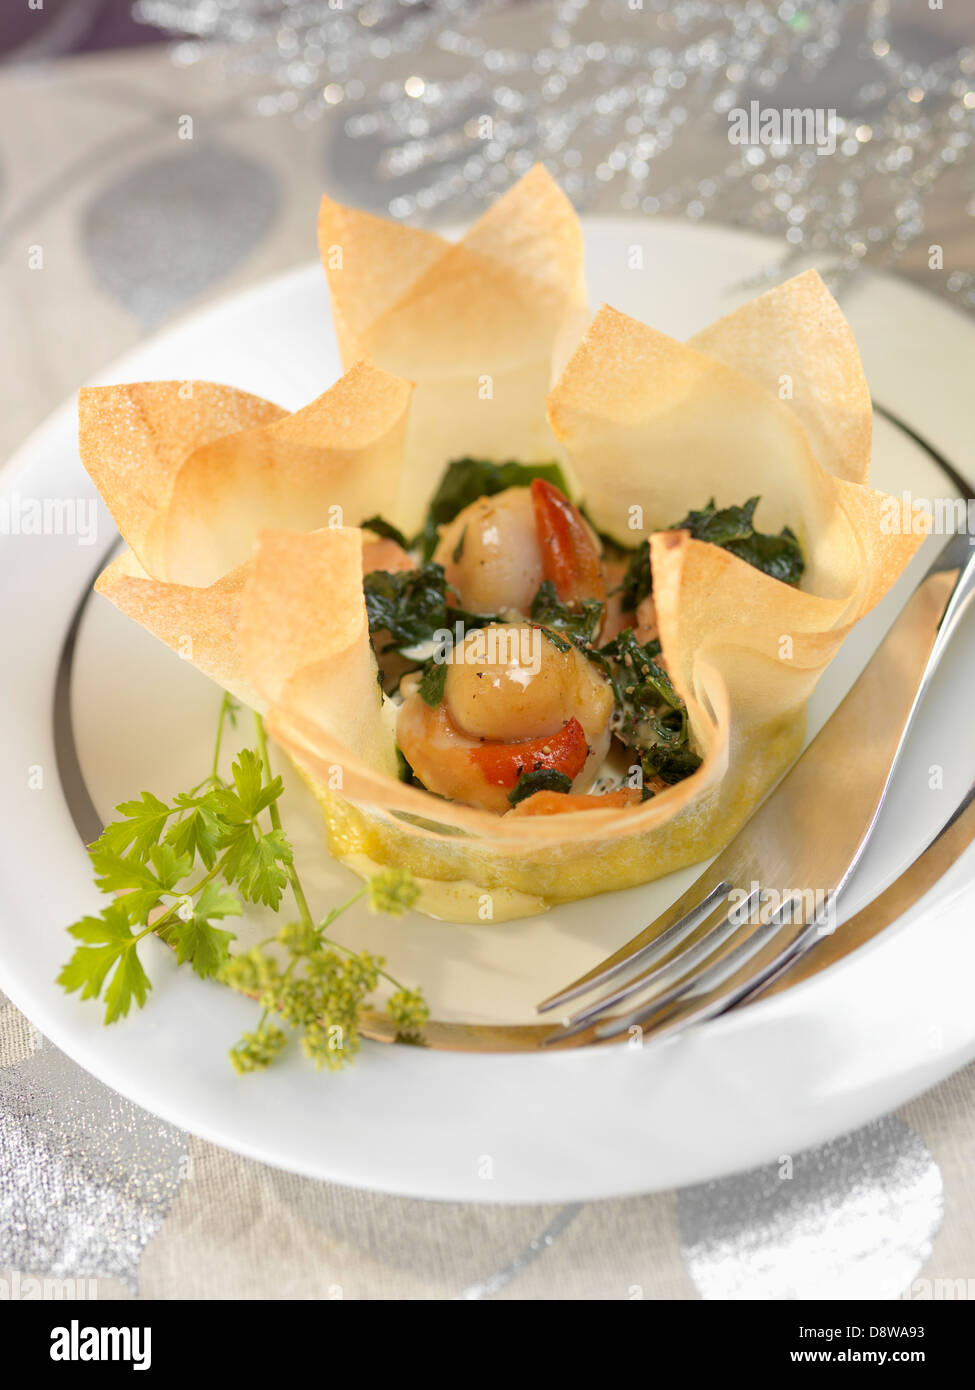 Scallops and salmon cooked in a filo pastry casing Stock Photo